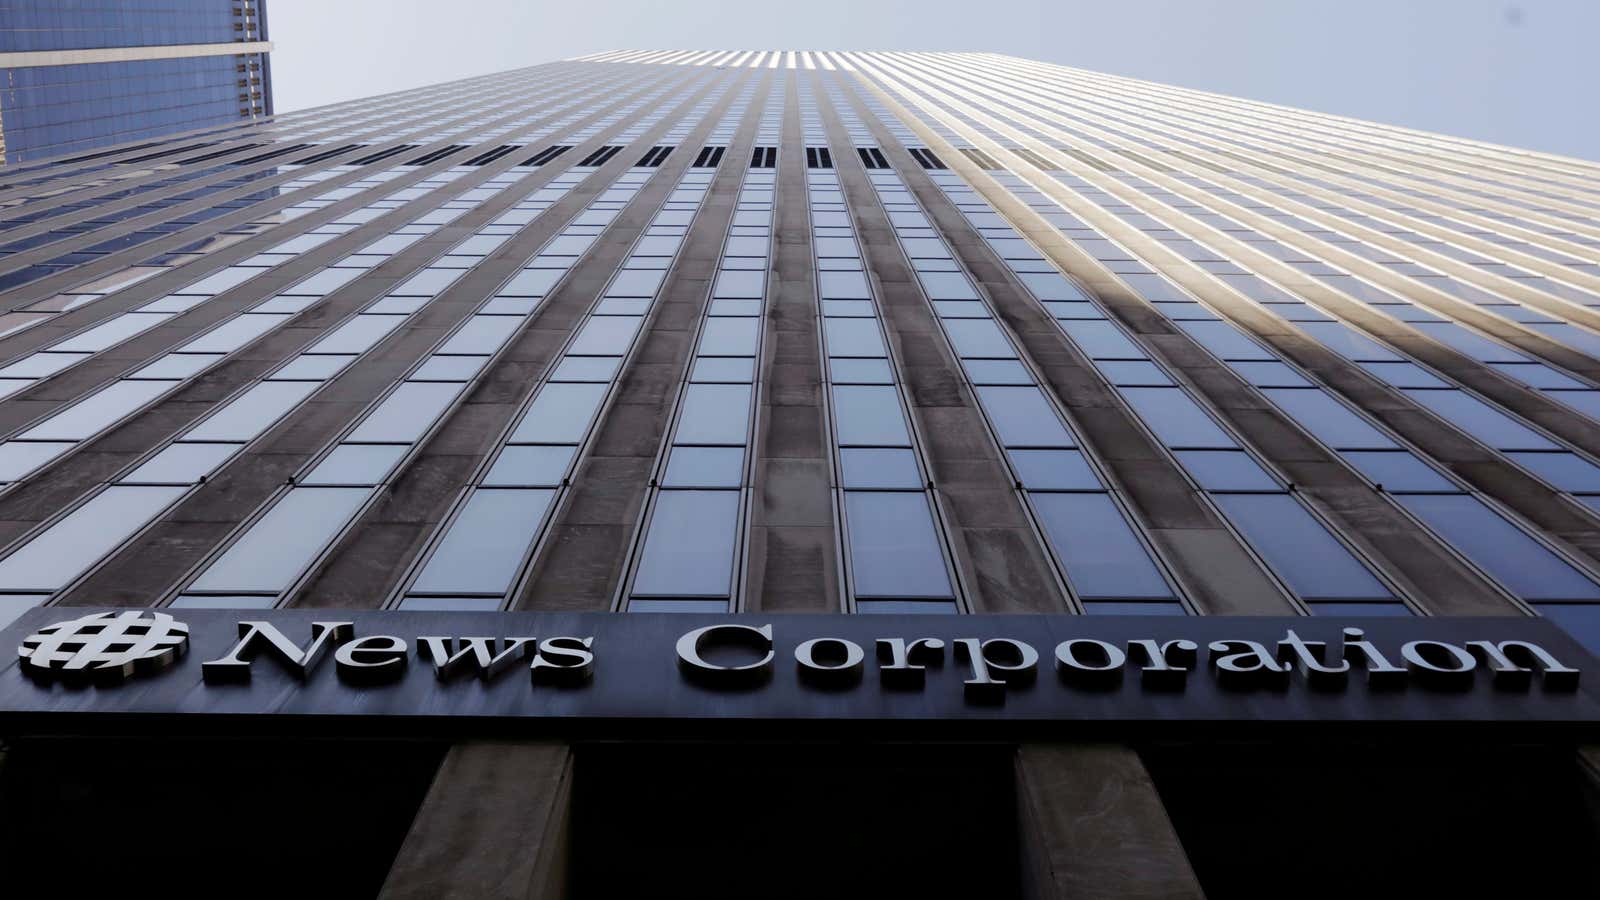 FILE PHOTO: The News Corporation logo is displayed on the side of a building in midtown Manhattan in New York, U.S., February 27, 2018. REUTERS/Lucas…